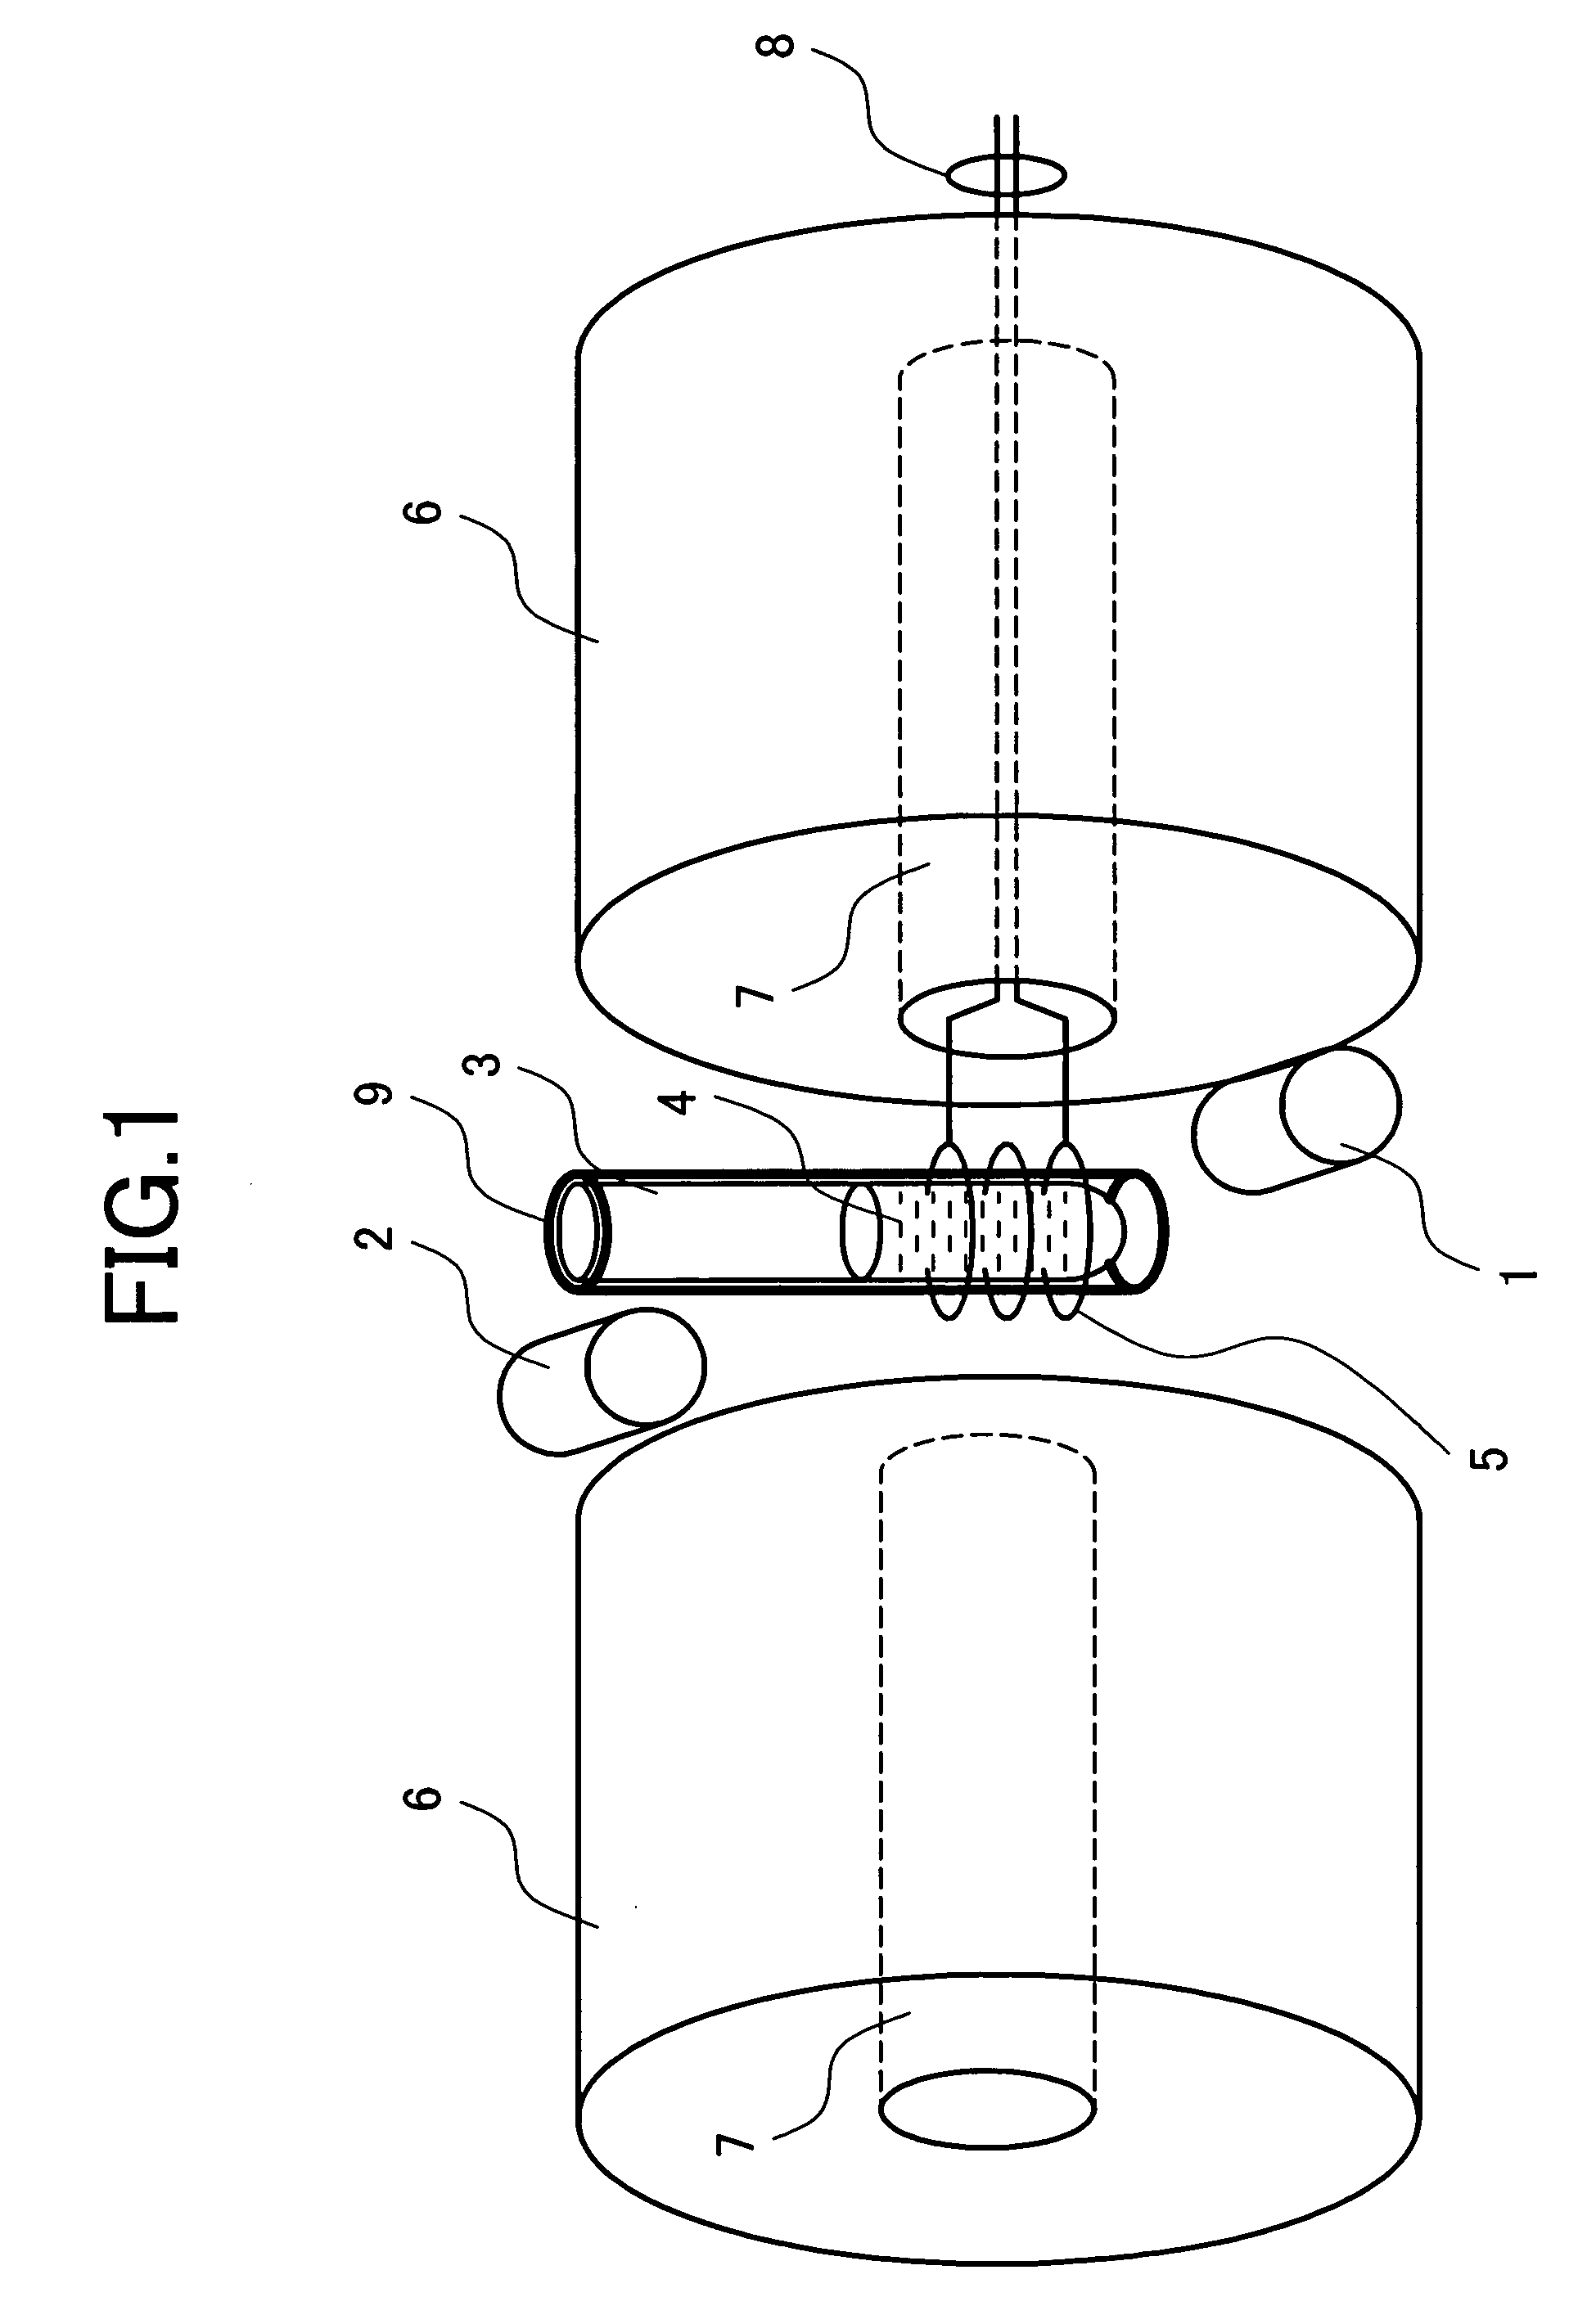 Method and apparatus for multiple spectroscopy analysis by using nuclear magnetic resonance